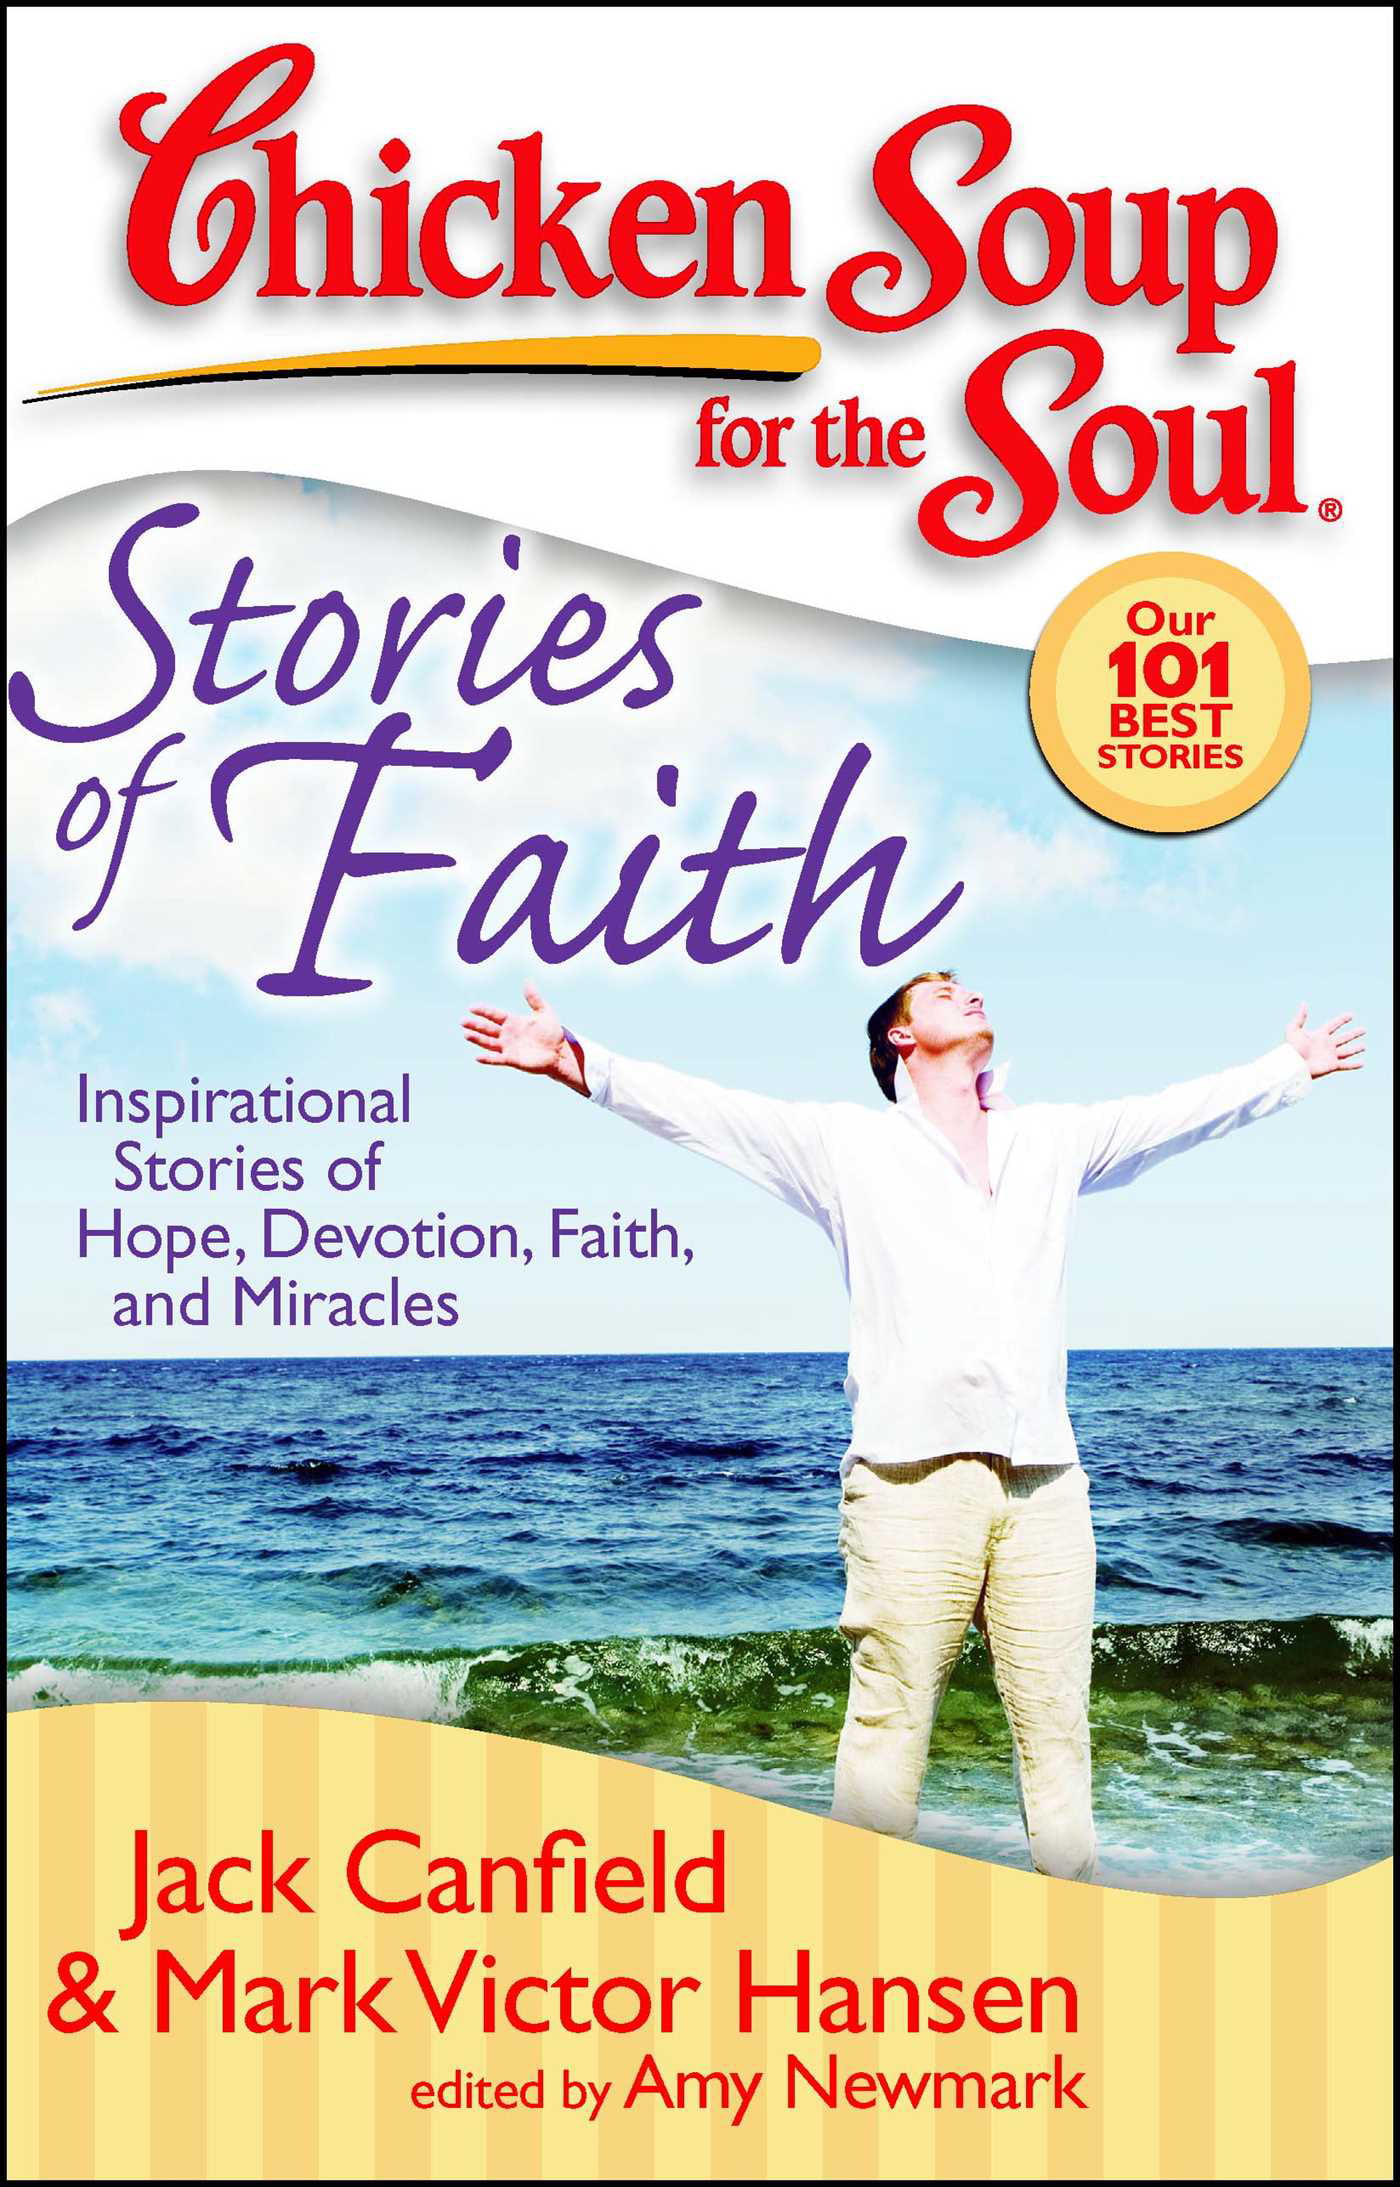 Chicken Soup For The Soul Chicken Soup For The Soul Stories Of Faith Inspirational Stories